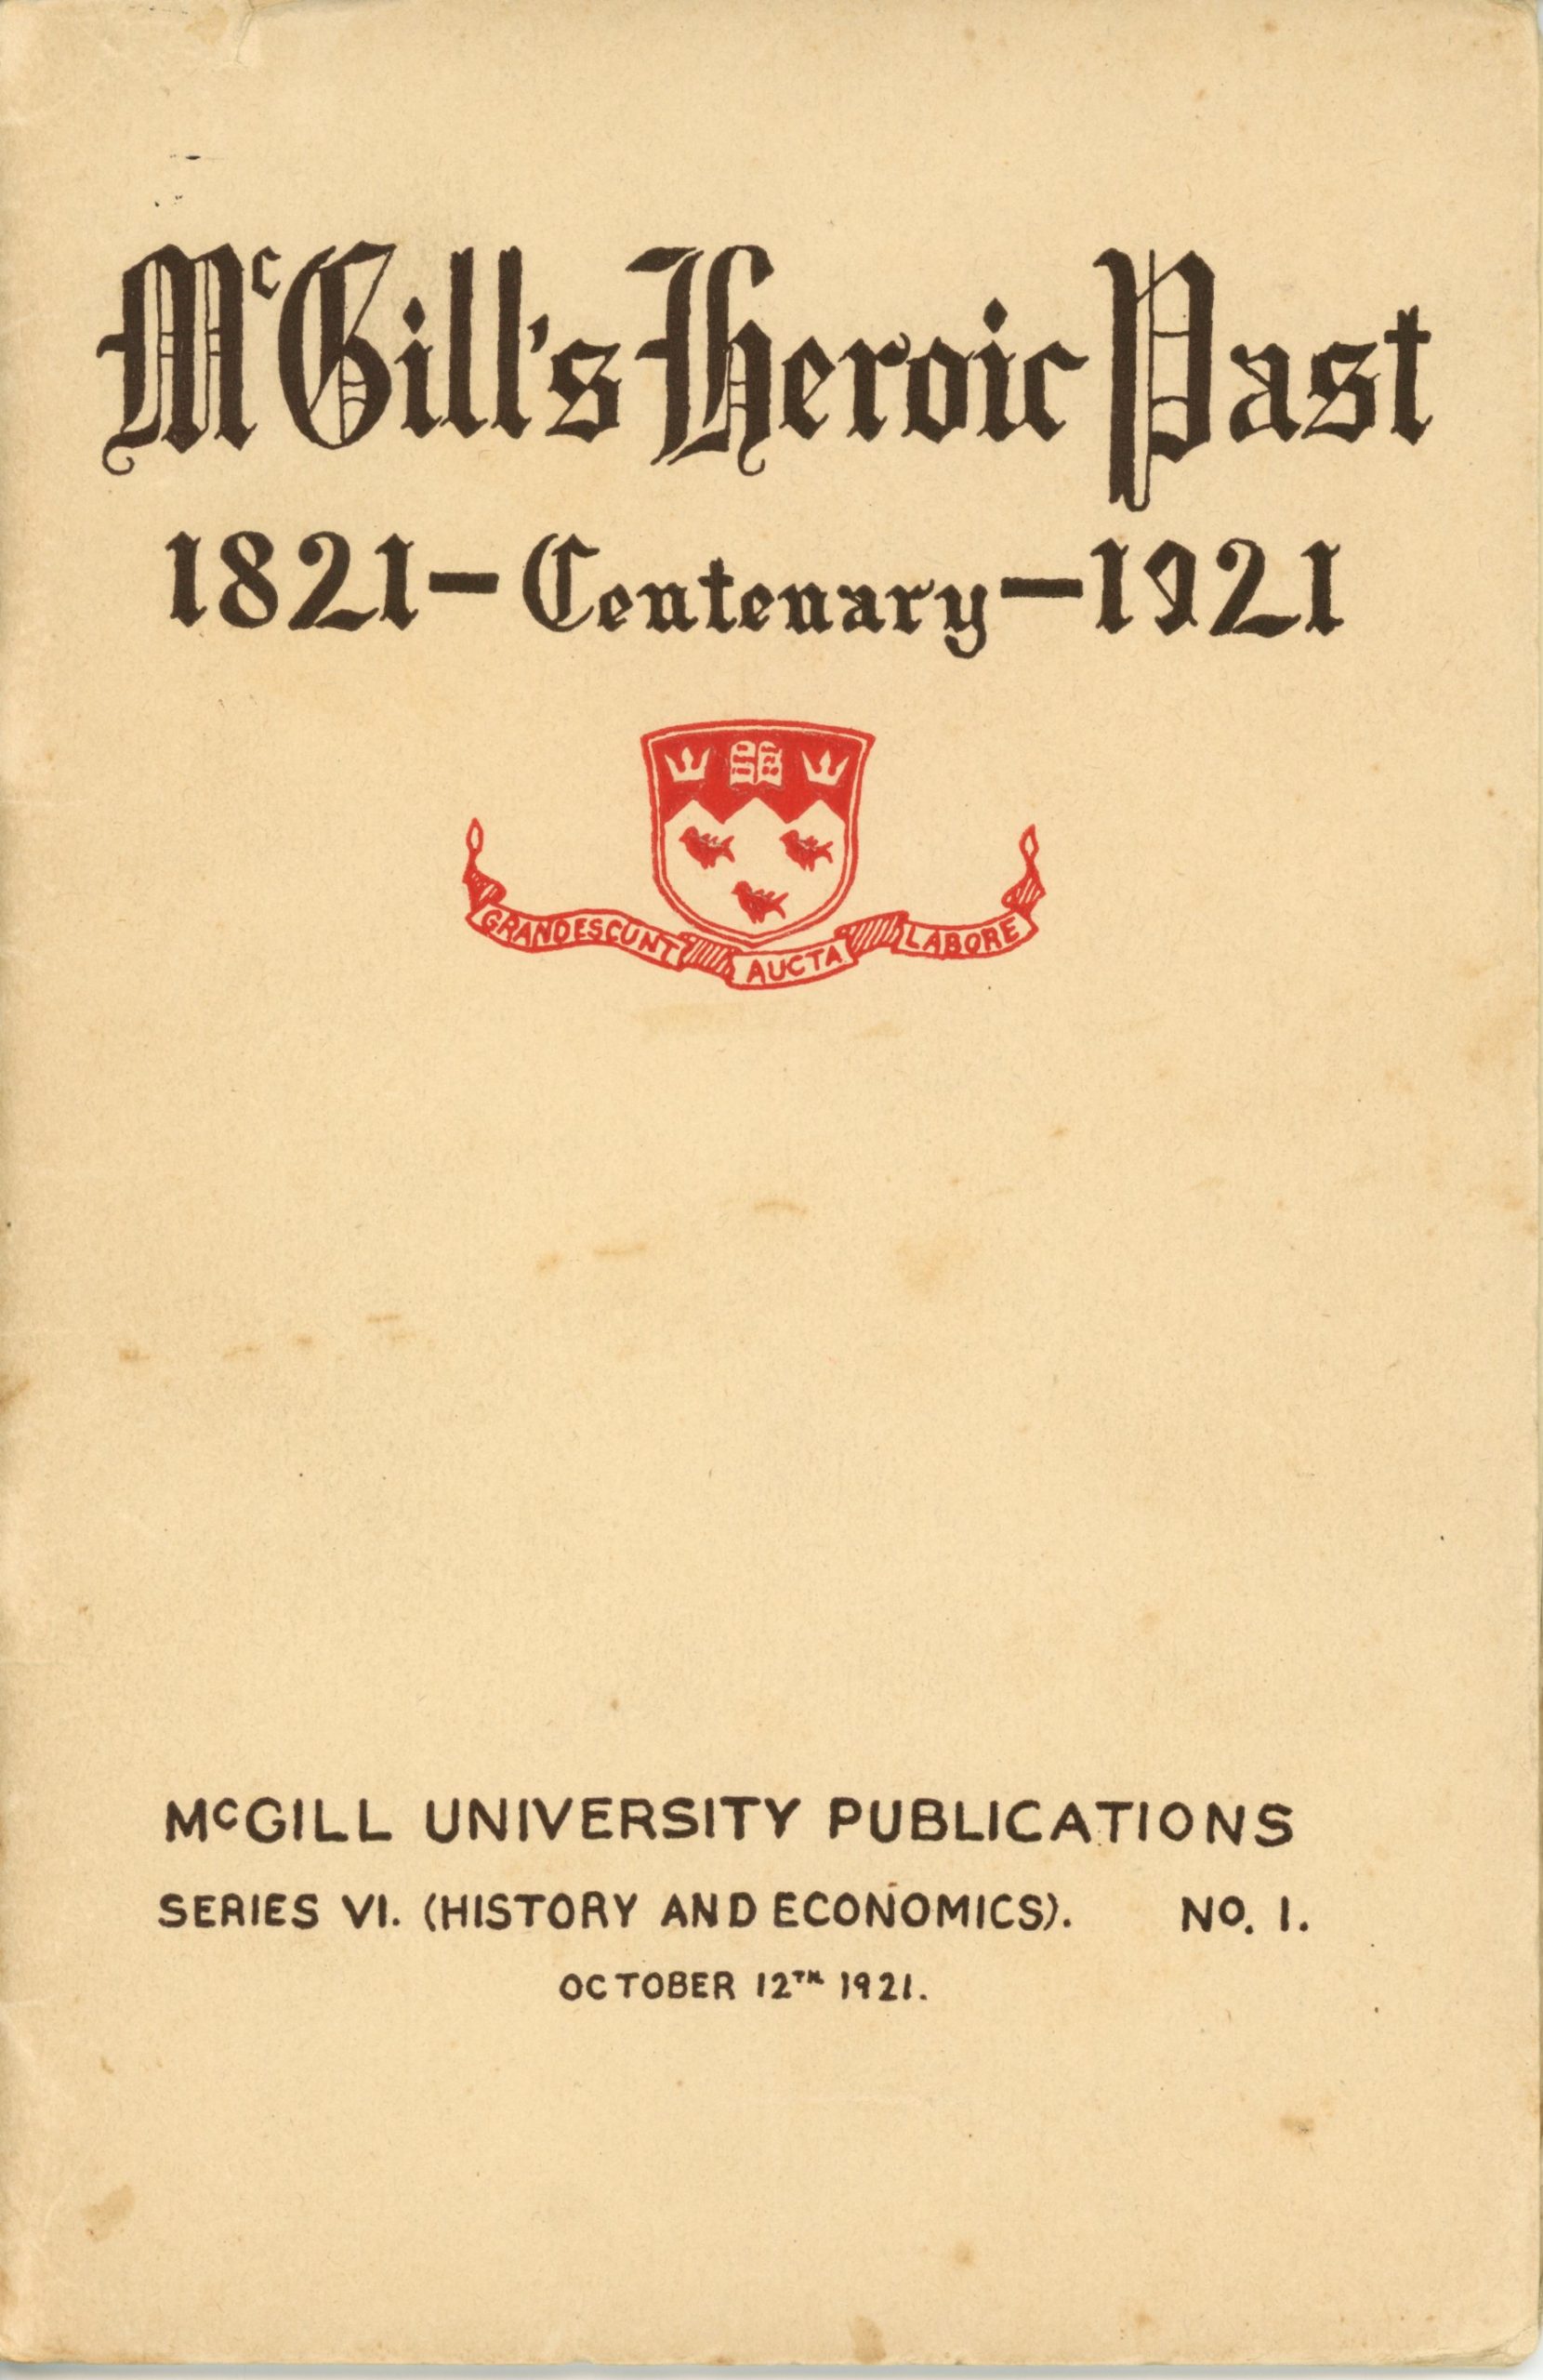 Cover of McGill’s Heroic Past, printed in 1921, black and red ink on sepia paper. At the top is the title “McGill’s Heroic Past 1821 – Centenary – 1921”. Below the title is the McGill University coat of arms. At the bottom of the page, the inscription “McGill University Publications – Series VI. (History and Economics). No.1 – October 12th 1921” is printed in black.